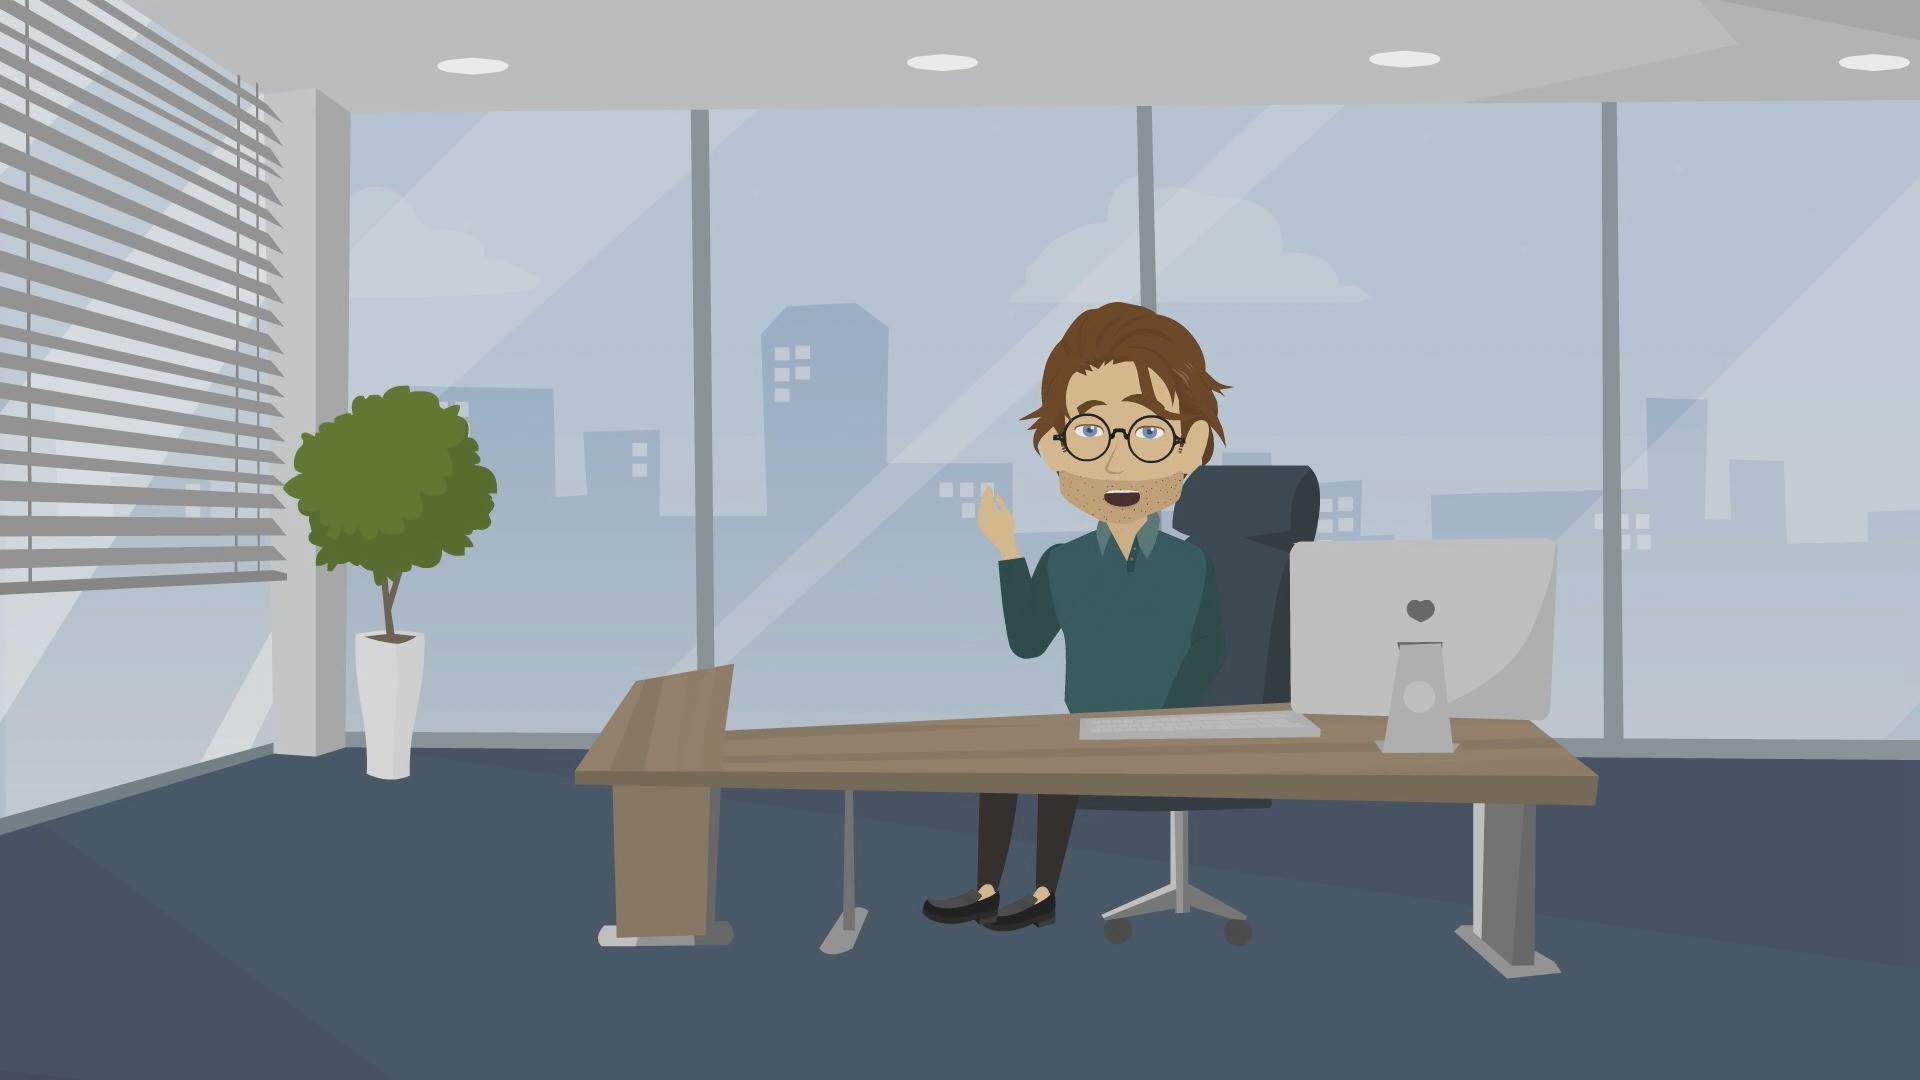 Animated office